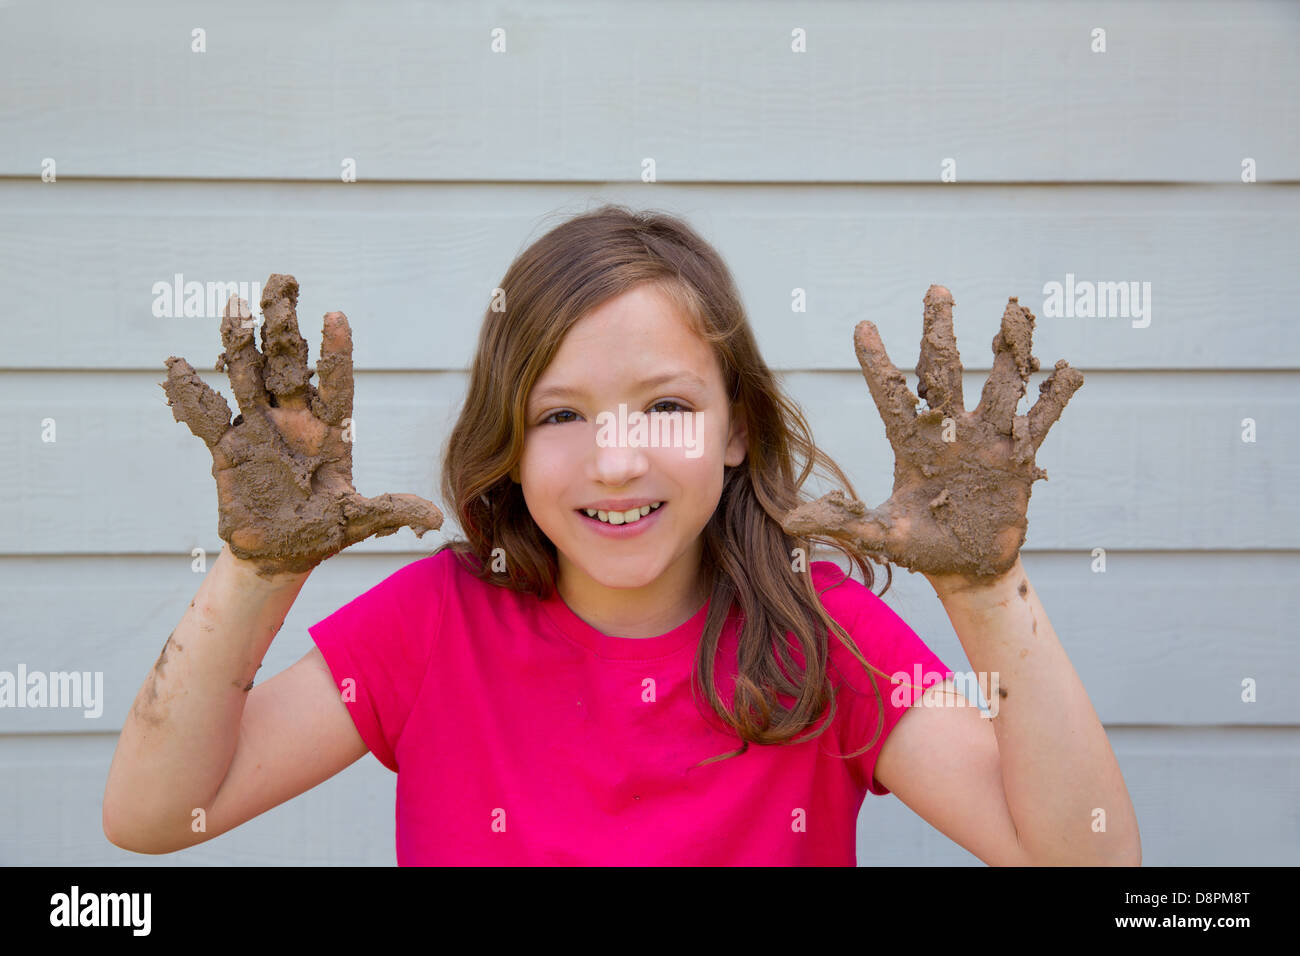 happy kid girl playing with mud with dirty hands smiling portrait Stock Photo